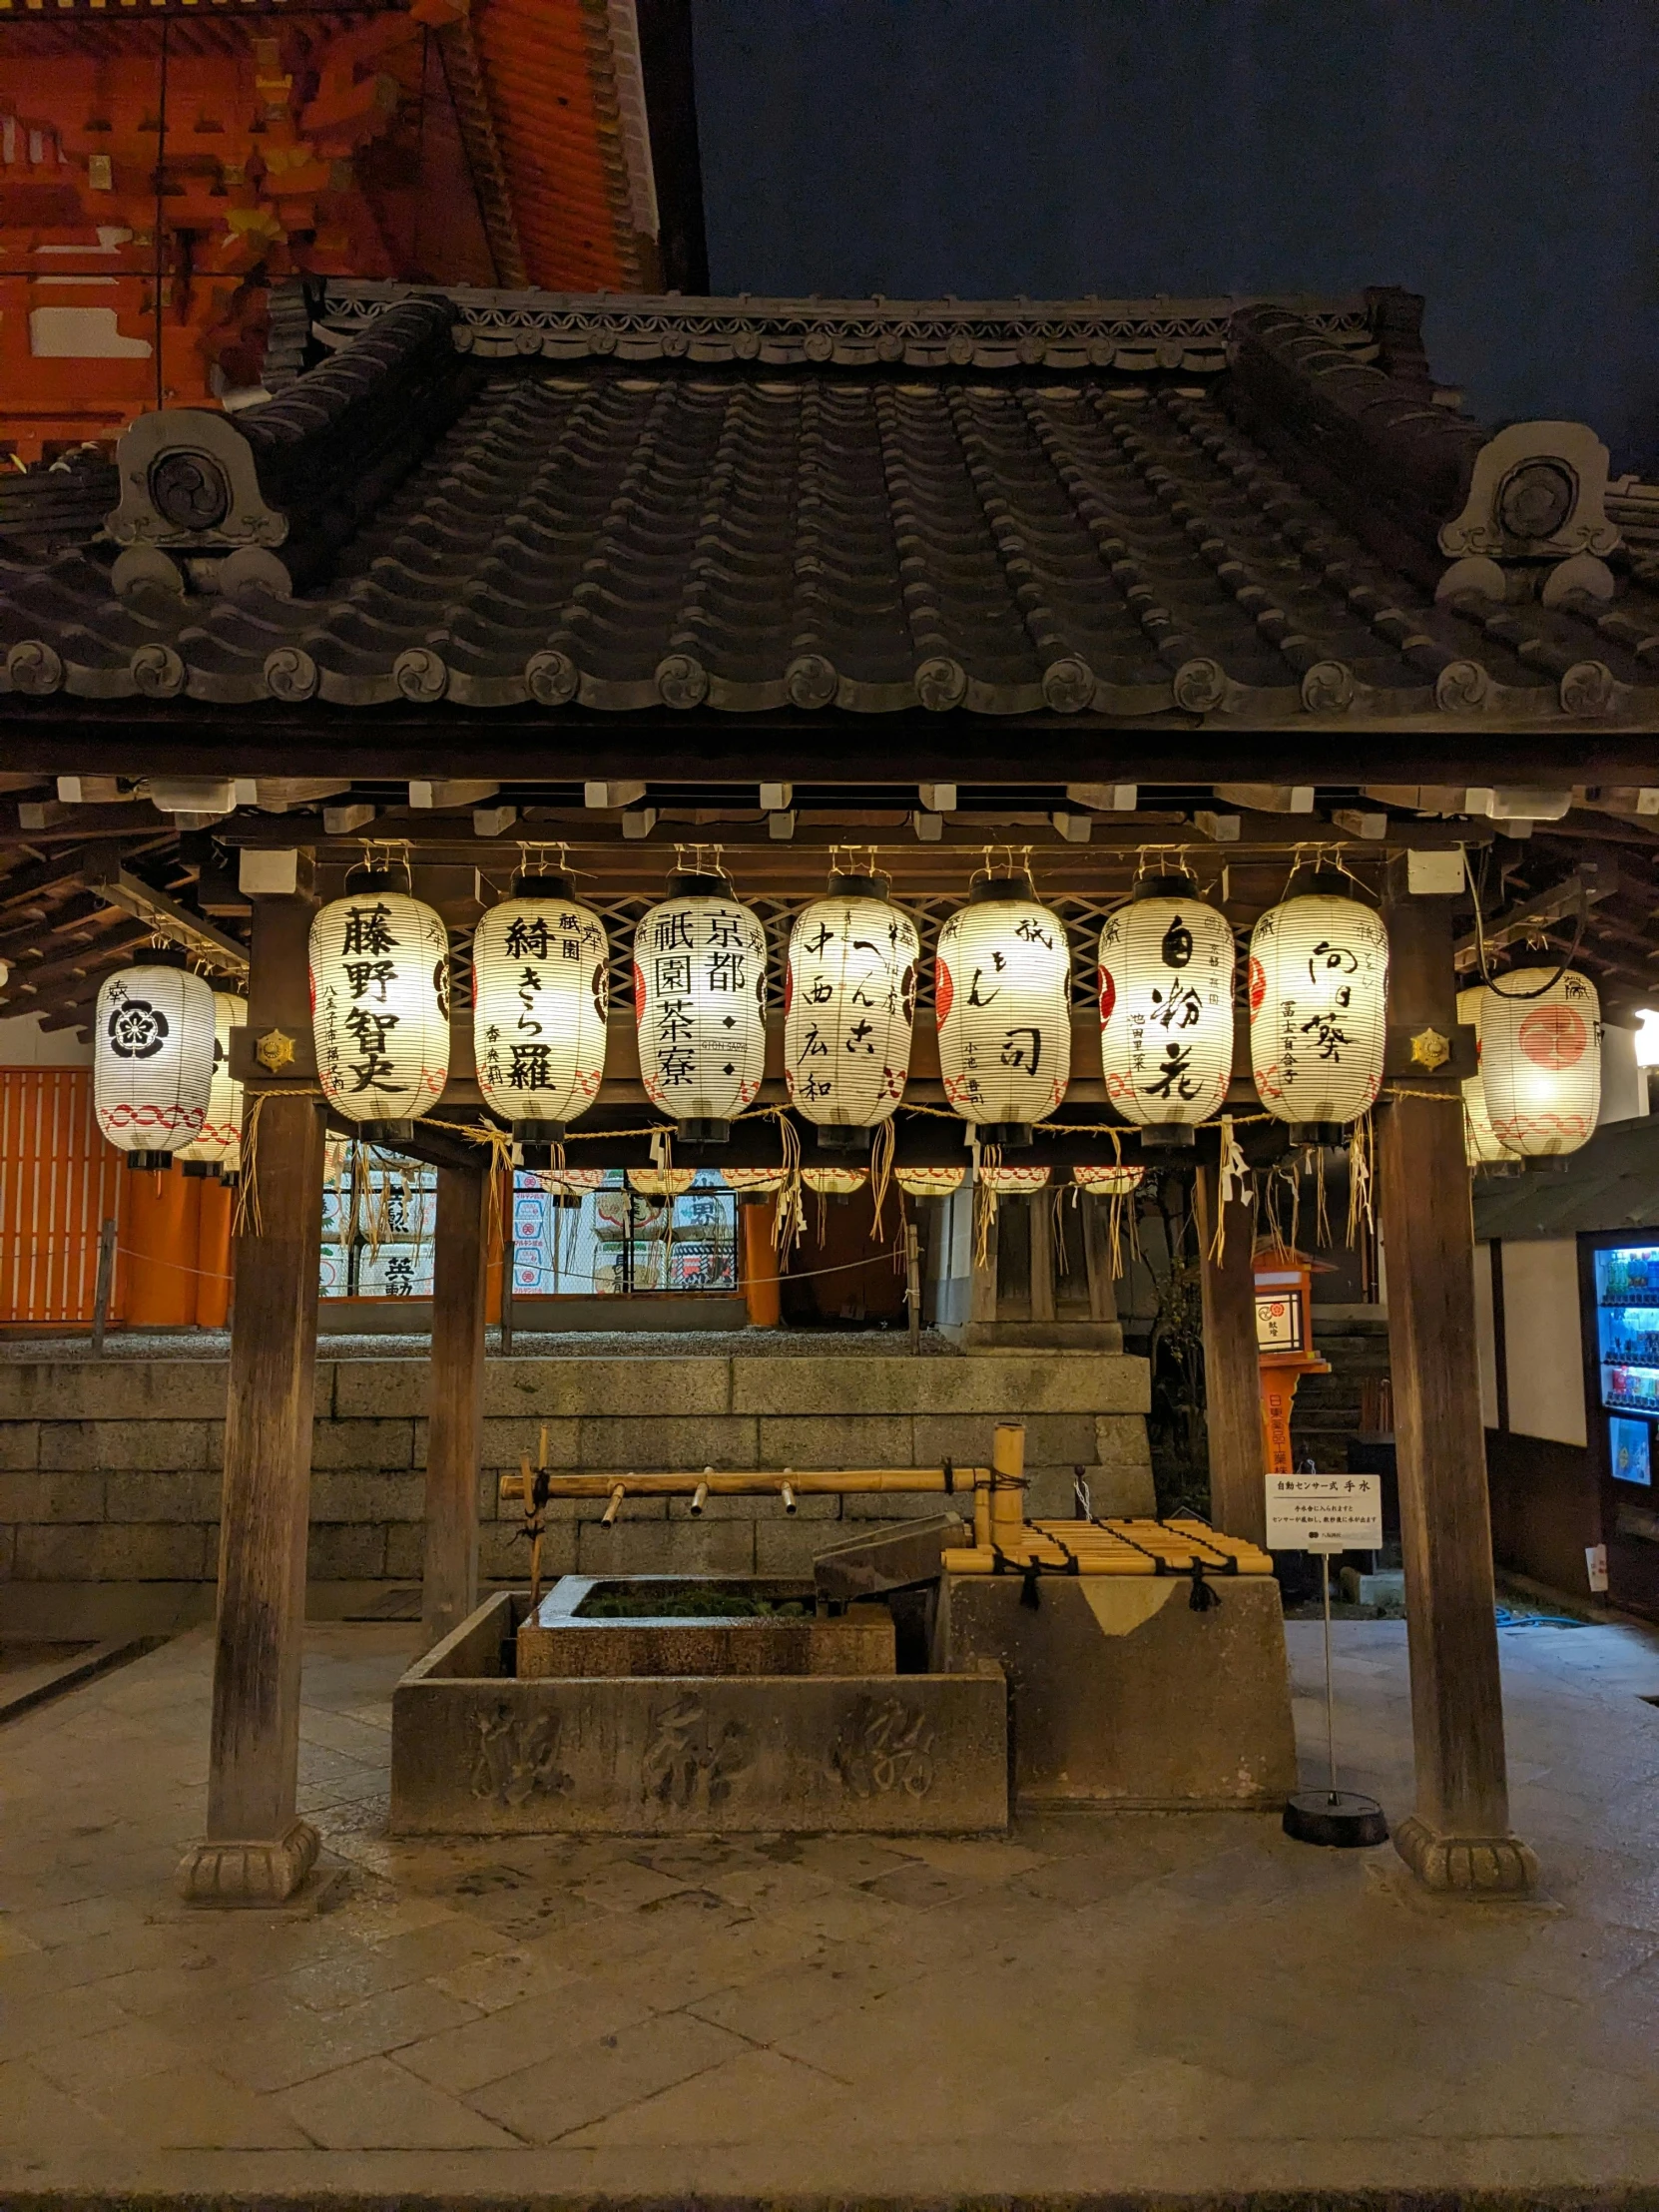 an ornate and artistic pavilion with hanging lanterns